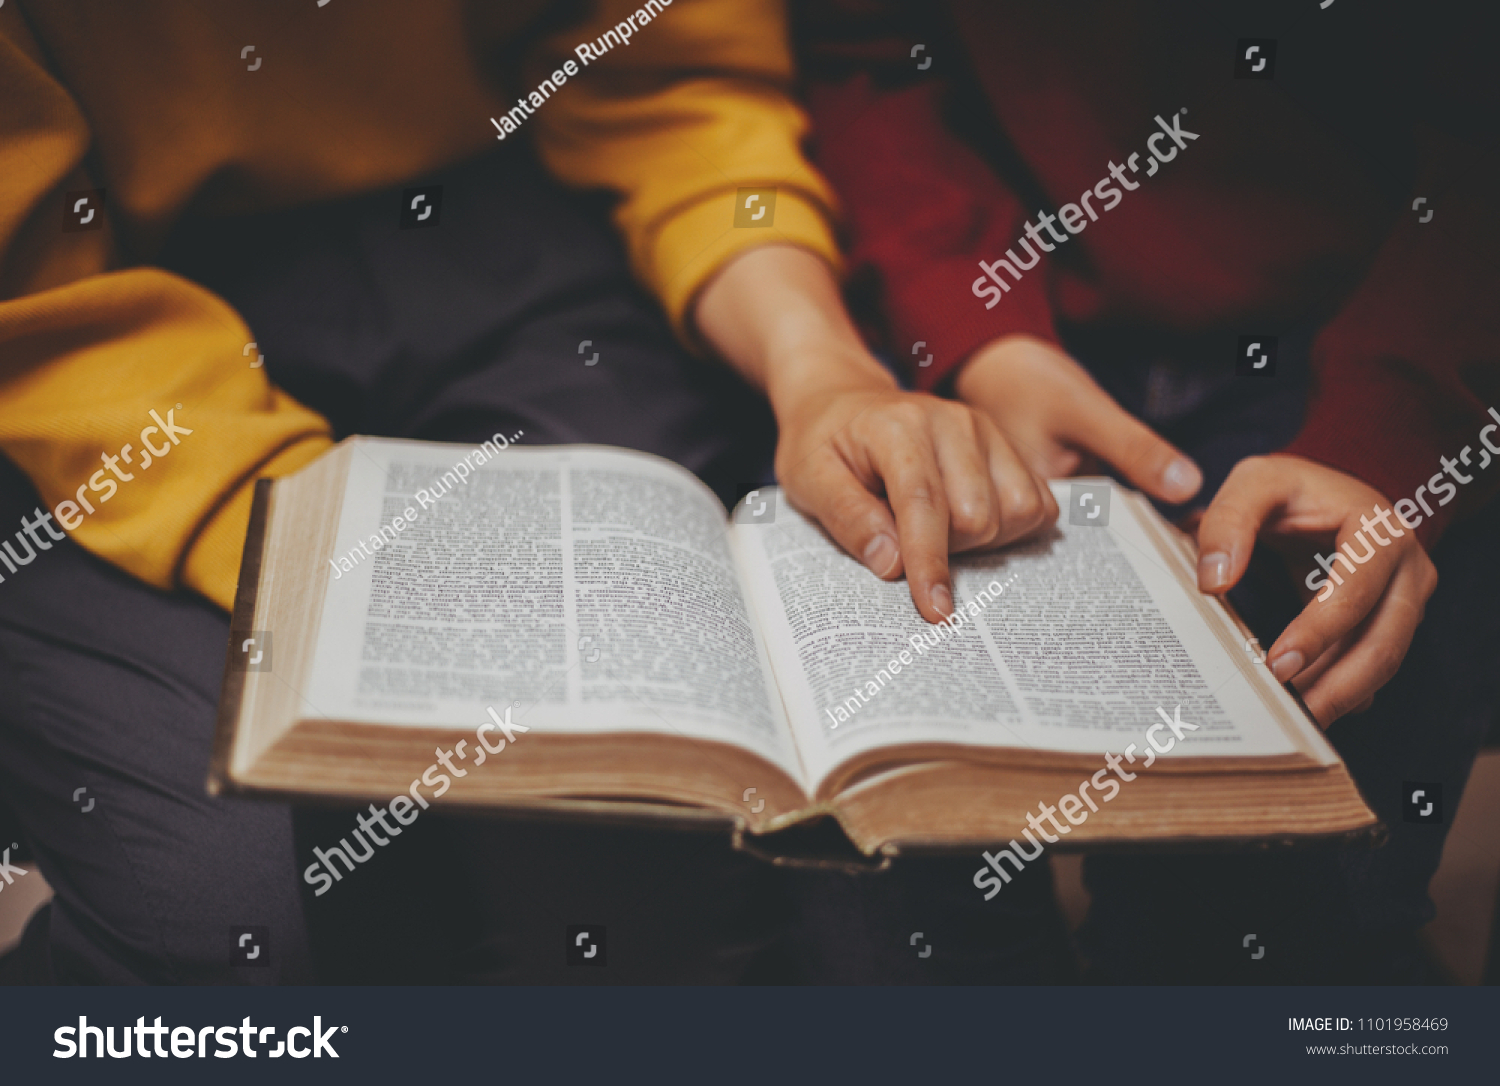 Two women studying the bible. #1101958469